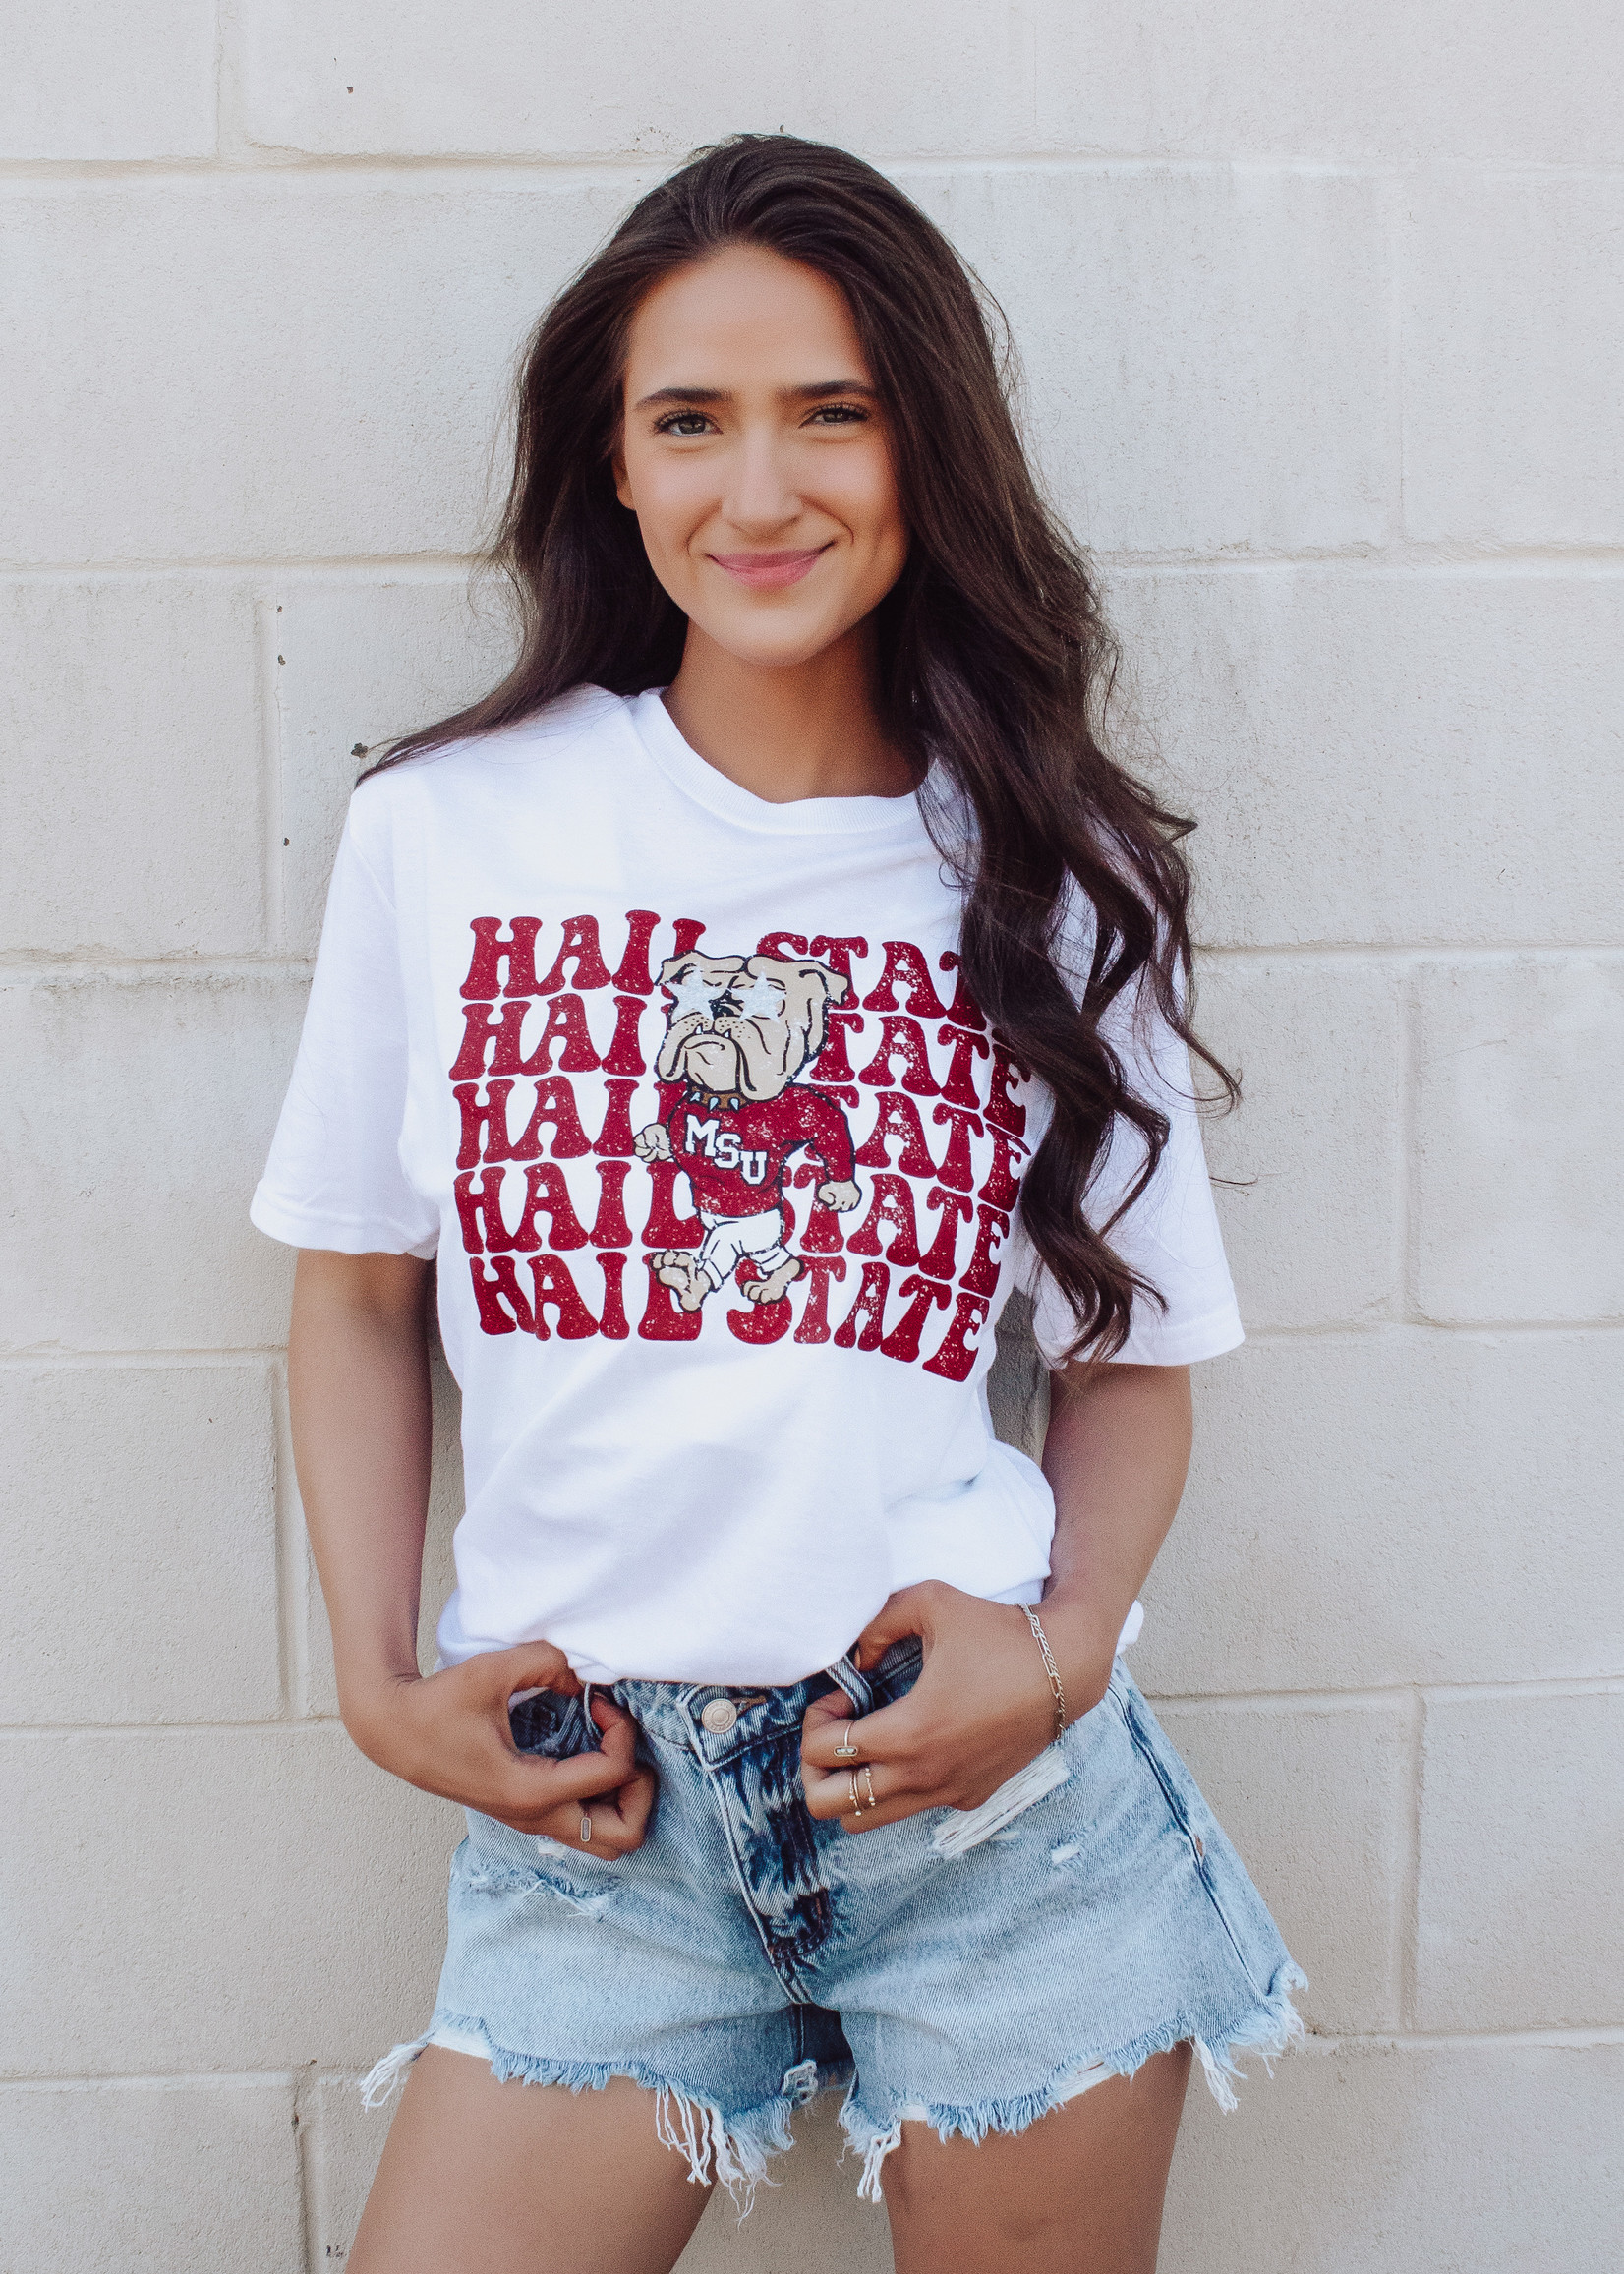 Hail State Stacked Tee